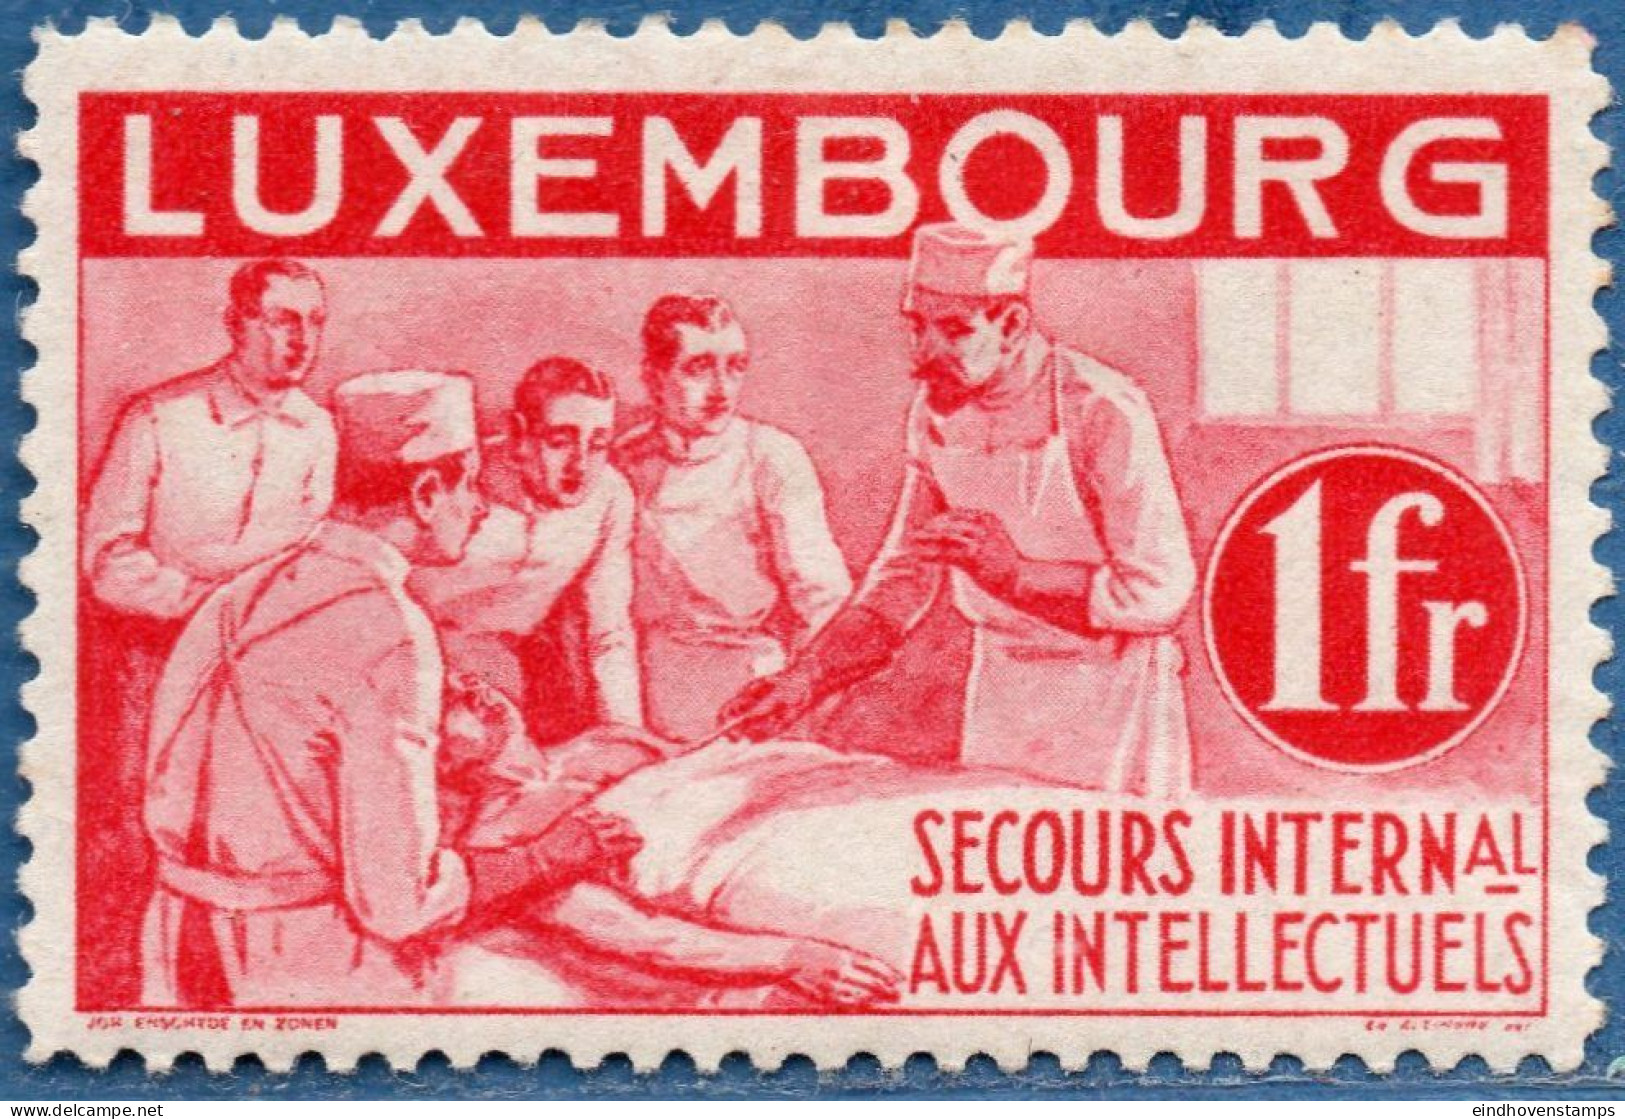 Luxemburg 1935 1 Fr, Surgeon At Operating Room With Patient, International Aid Emigrated Scientists 1 Value MH - Medicine